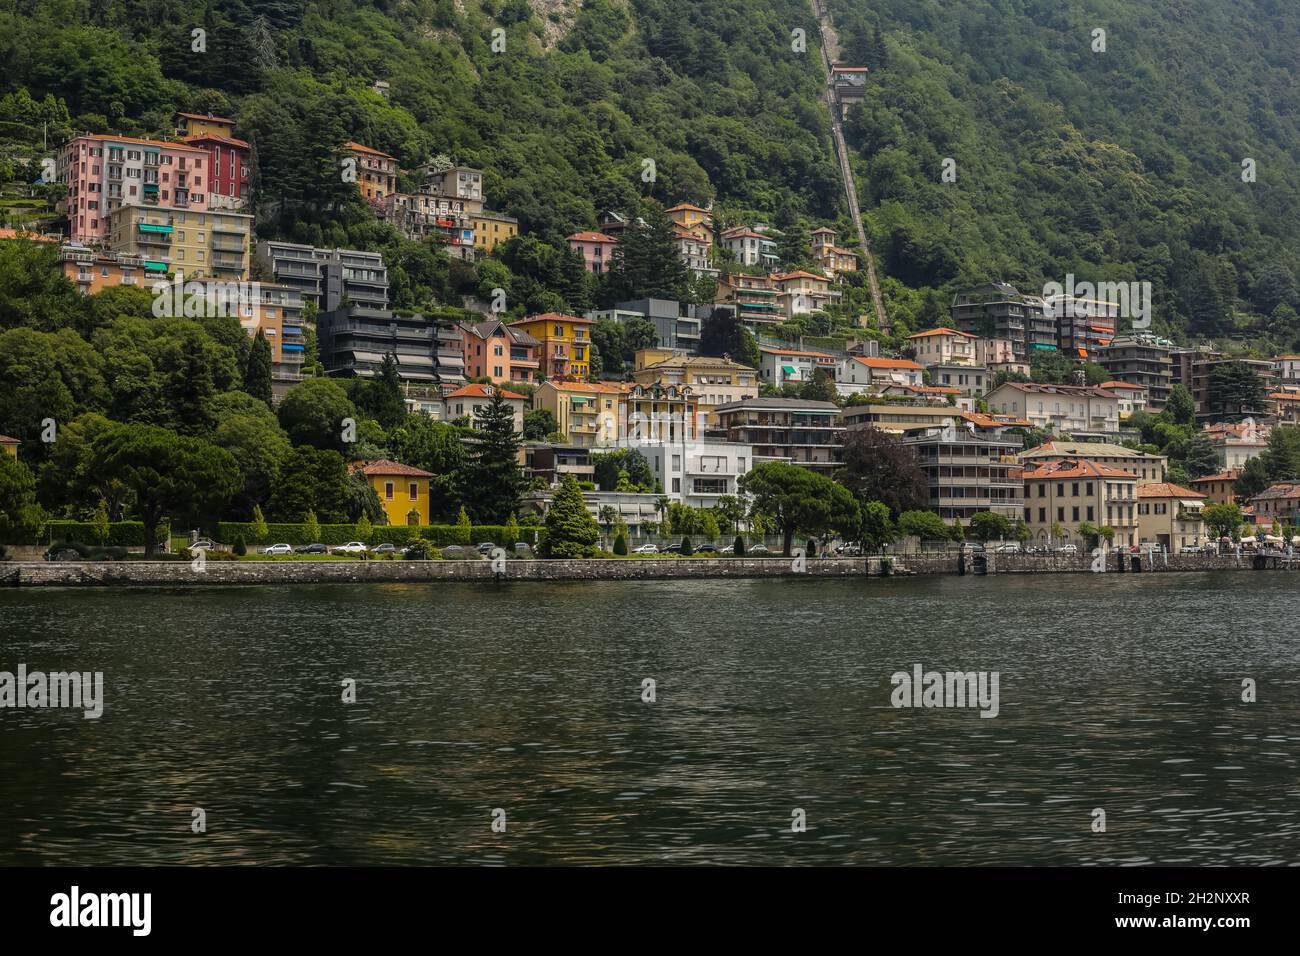 Como, Italy - June 15, 2017: View of Traditional Colorful Buildings in Lake Como Stock Photo